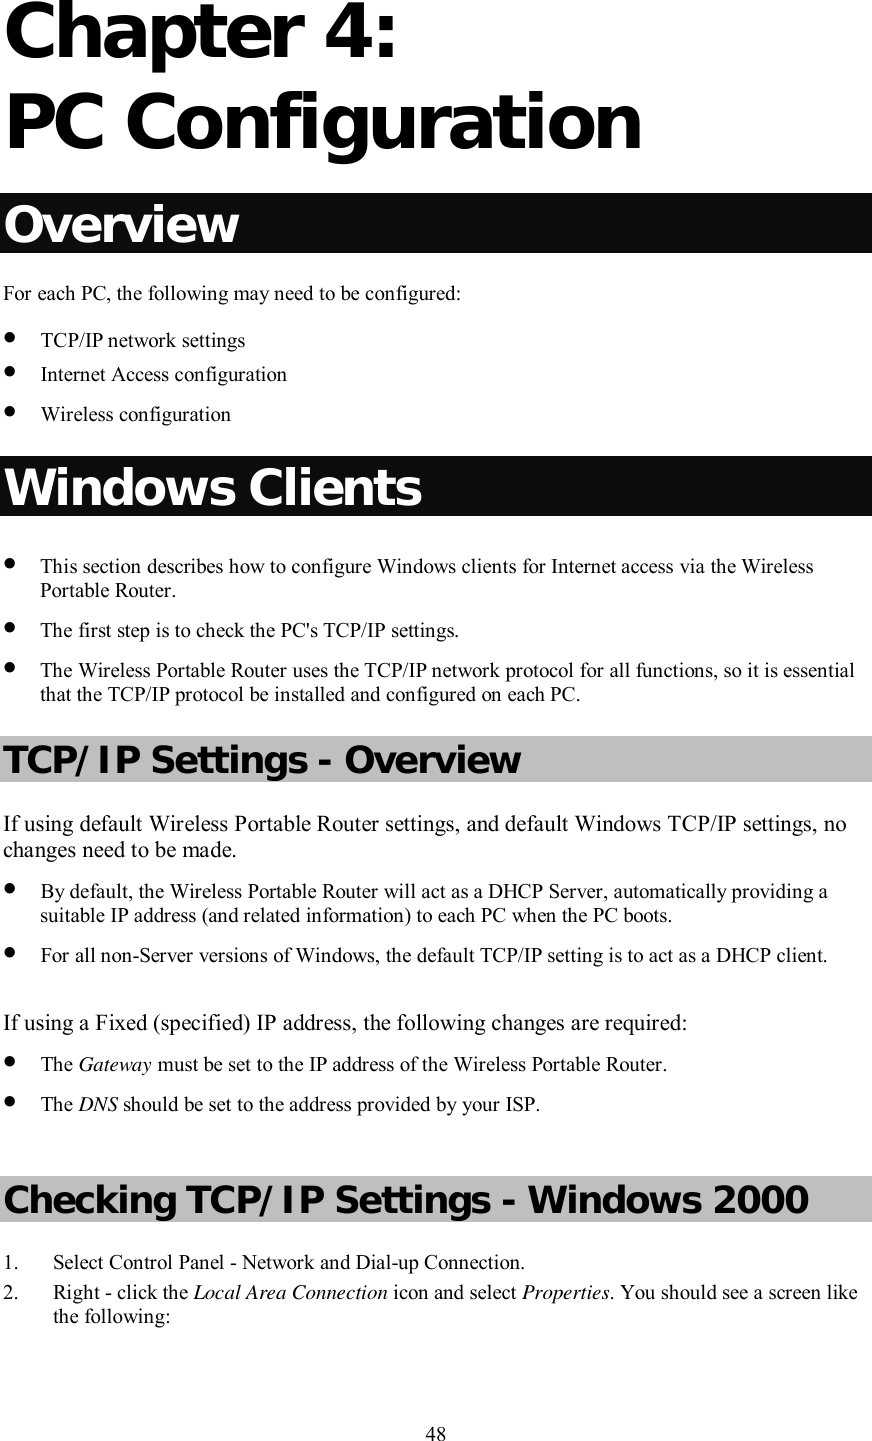    48  Chapter 4:  PC Configuration Overview For each PC, the following may need to be configured: • TCP/IP network settings • Internet Access configuration • Wireless configuration Windows Clients • This section describes how to configure Windows clients for Internet access via the Wireless Portable Router. • The first step is to check the PC&apos;s TCP/IP settings.  • The Wireless Portable Router uses the TCP/IP network protocol for all functions, so it is essential that the TCP/IP protocol be installed and configured on each PC. TCP/IP Settings - Overview If using default Wireless Portable Router settings, and default Windows TCP/IP settings, no changes need to be made. • By default, the Wireless Portable Router will act as a DHCP Server, automatically providing a suitable IP address (and related information) to each PC when the PC boots. • For all non-Server versions of Windows, the default TCP/IP setting is to act as a DHCP client.  If using a Fixed (specified) IP address, the following changes are required: • The Gateway must be set to the IP address of the Wireless Portable Router. • The DNS should be set to the address provided by your ISP.  Checking TCP/IP Settings - Windows 2000 1. Select Control Panel - Network and Dial-up Connection. 2. Right - click the Local Area Connection icon and select Properties. You should see a screen like the following: 